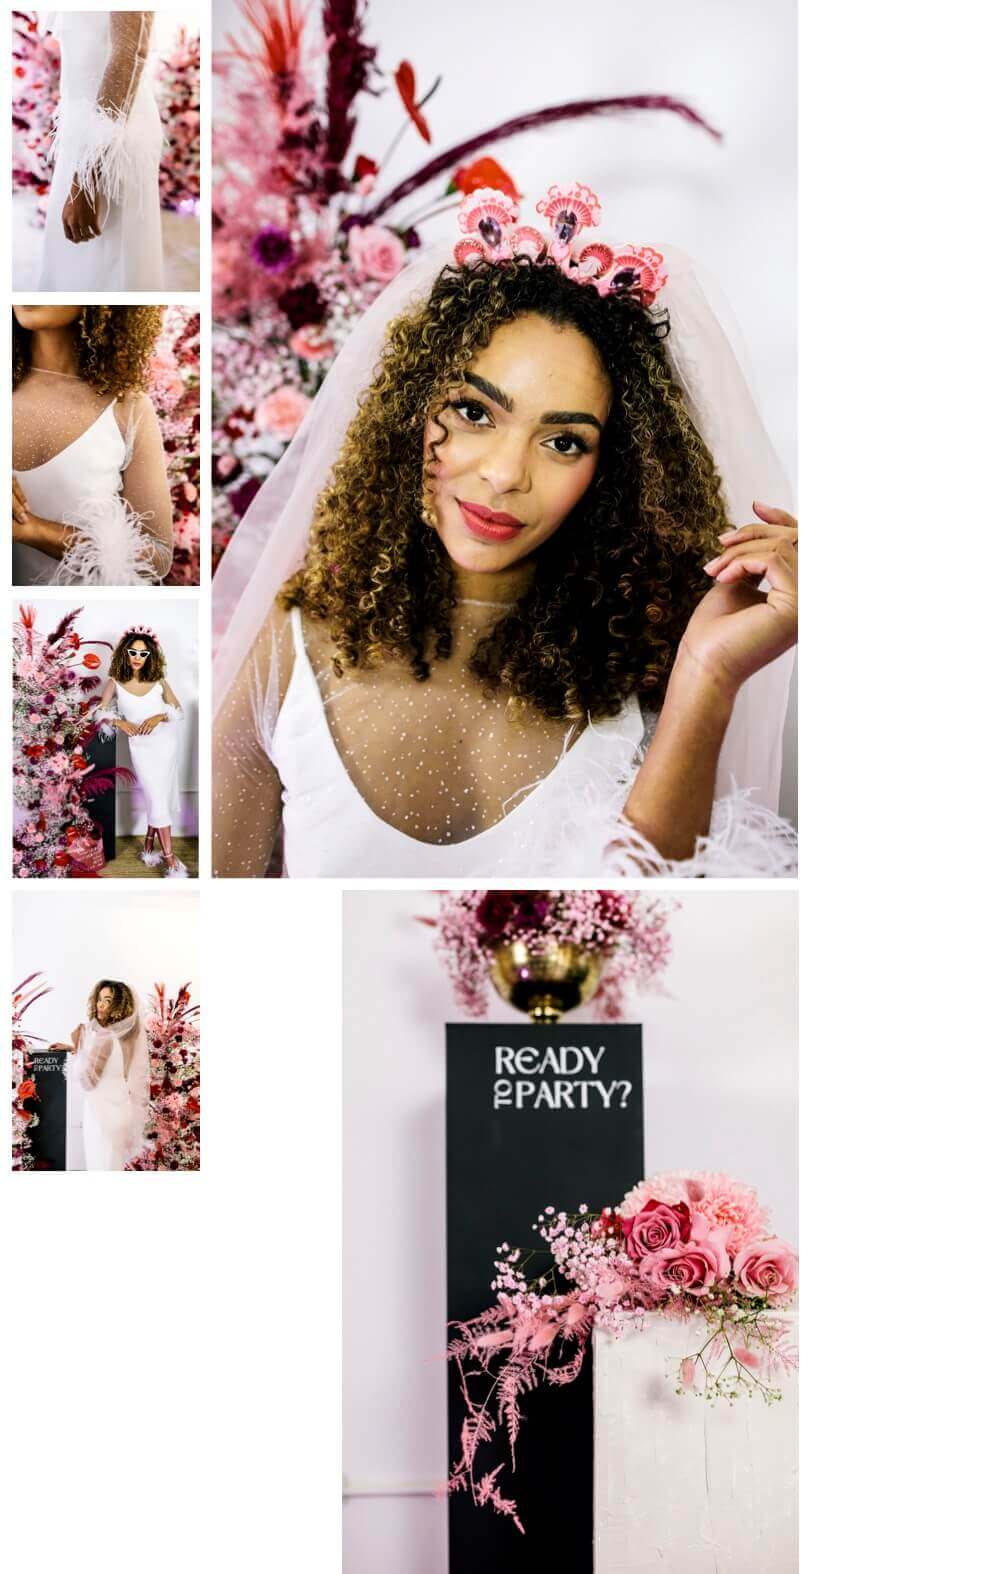 a selection of photos showing a bride in a white wedding dress posing next to a dramatic pink floral display against a white background